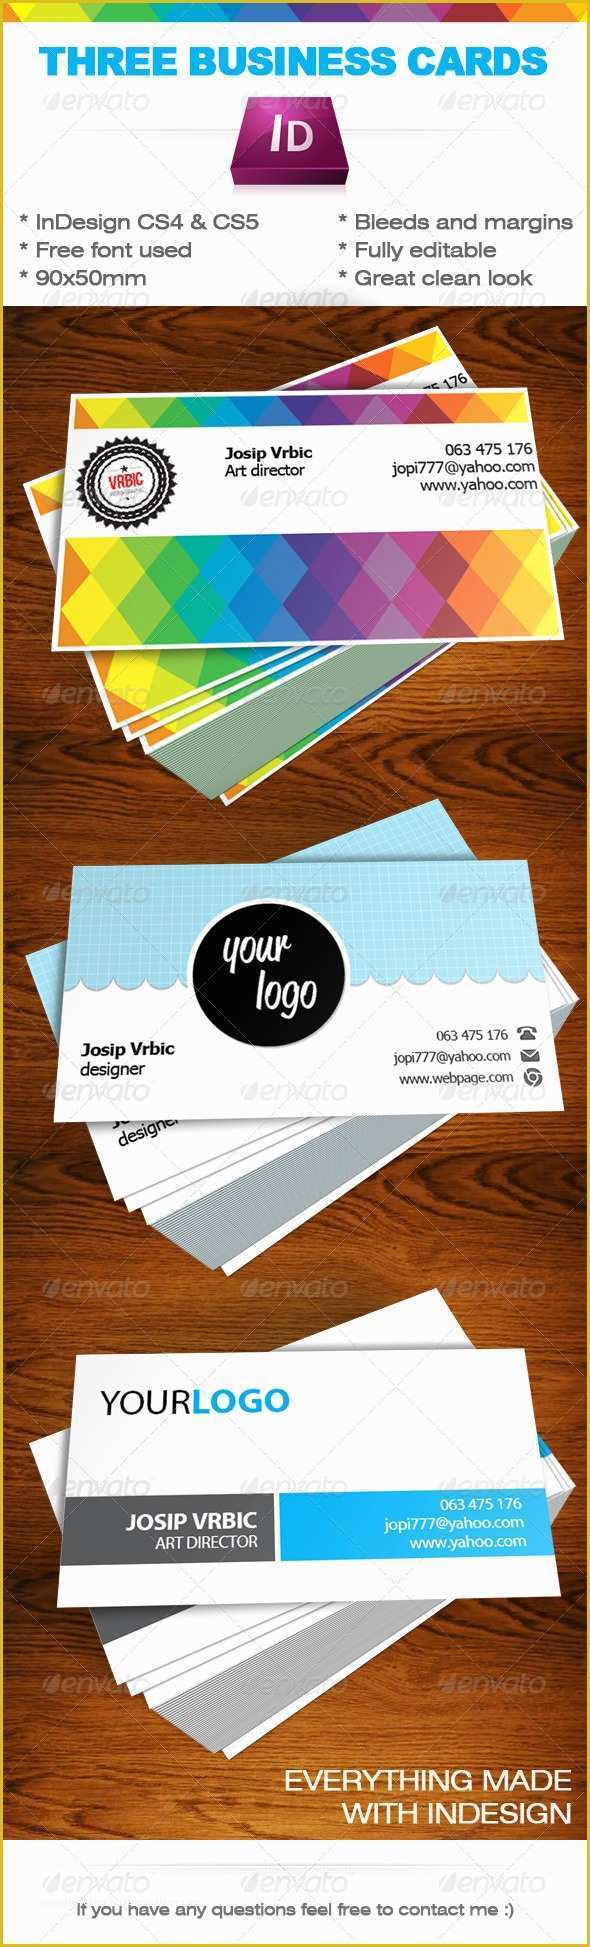 Indesign Business Card Template Free Of Business Cards Indesign Templates